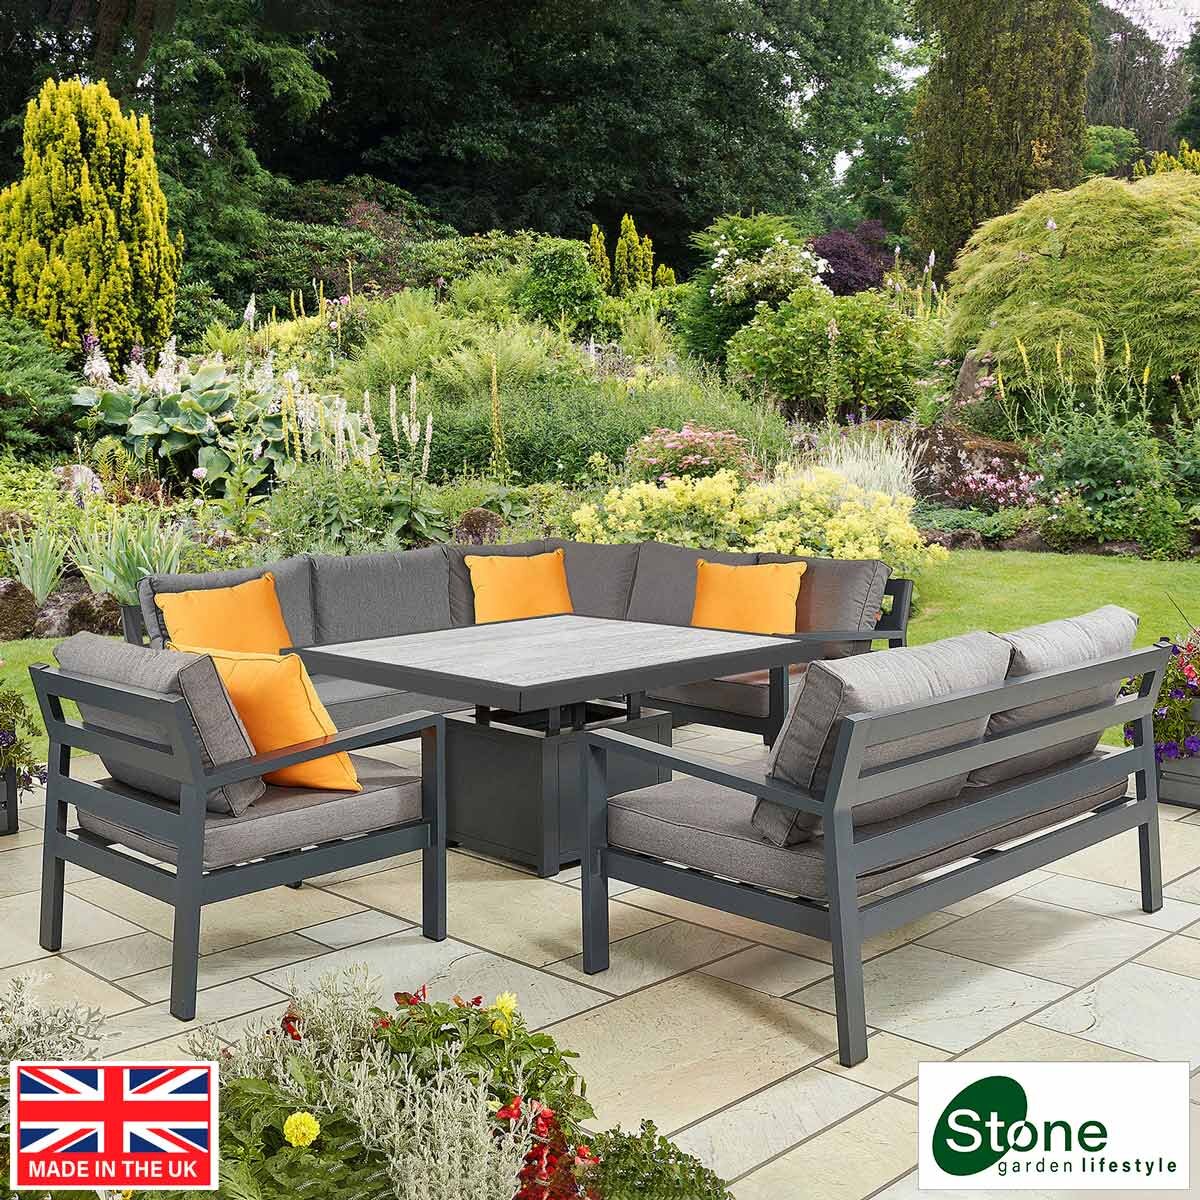 Stone Garden 4 Piece Deep Seating Corner Patio Set with Dual Height Ceramic Table in Grey